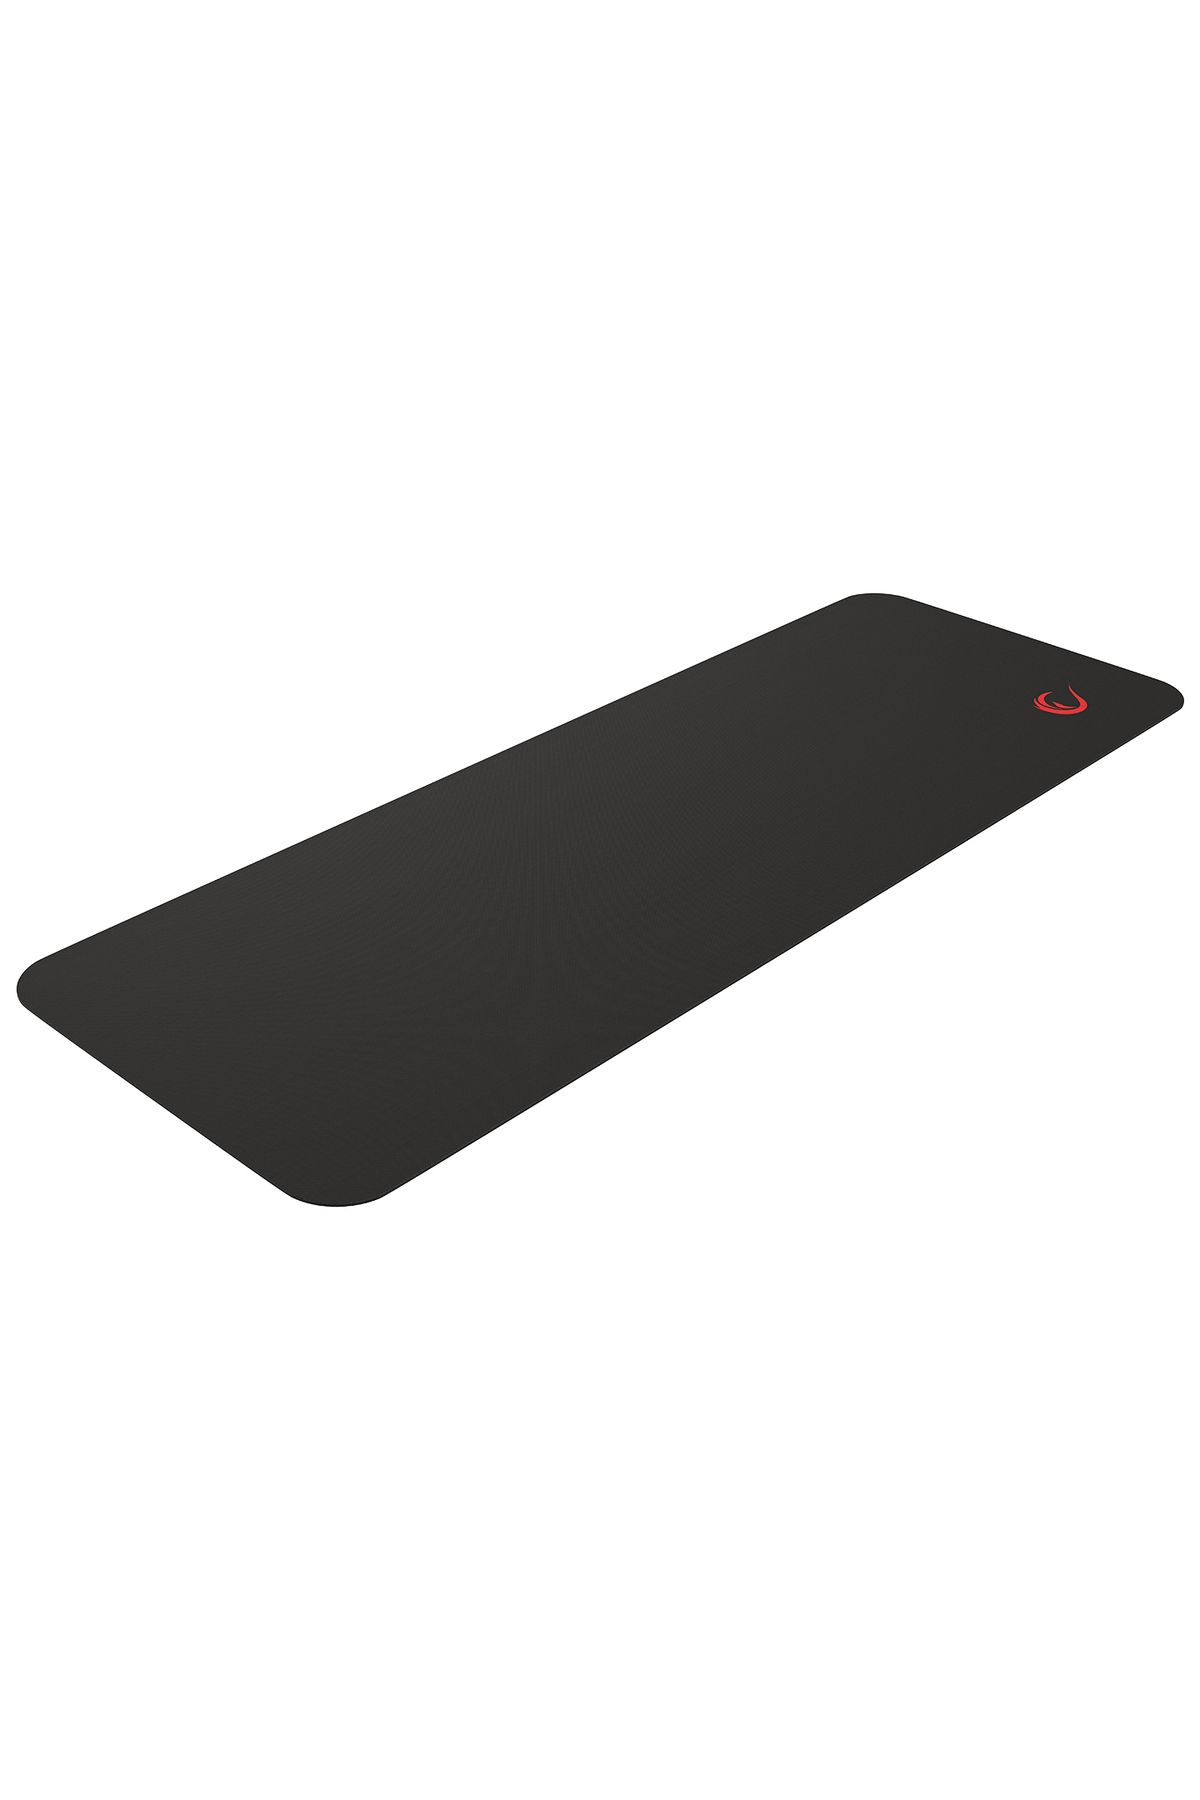 Rampage 300x700x3mm Gaming Mouse Pad Oyuncu Mouse Pad